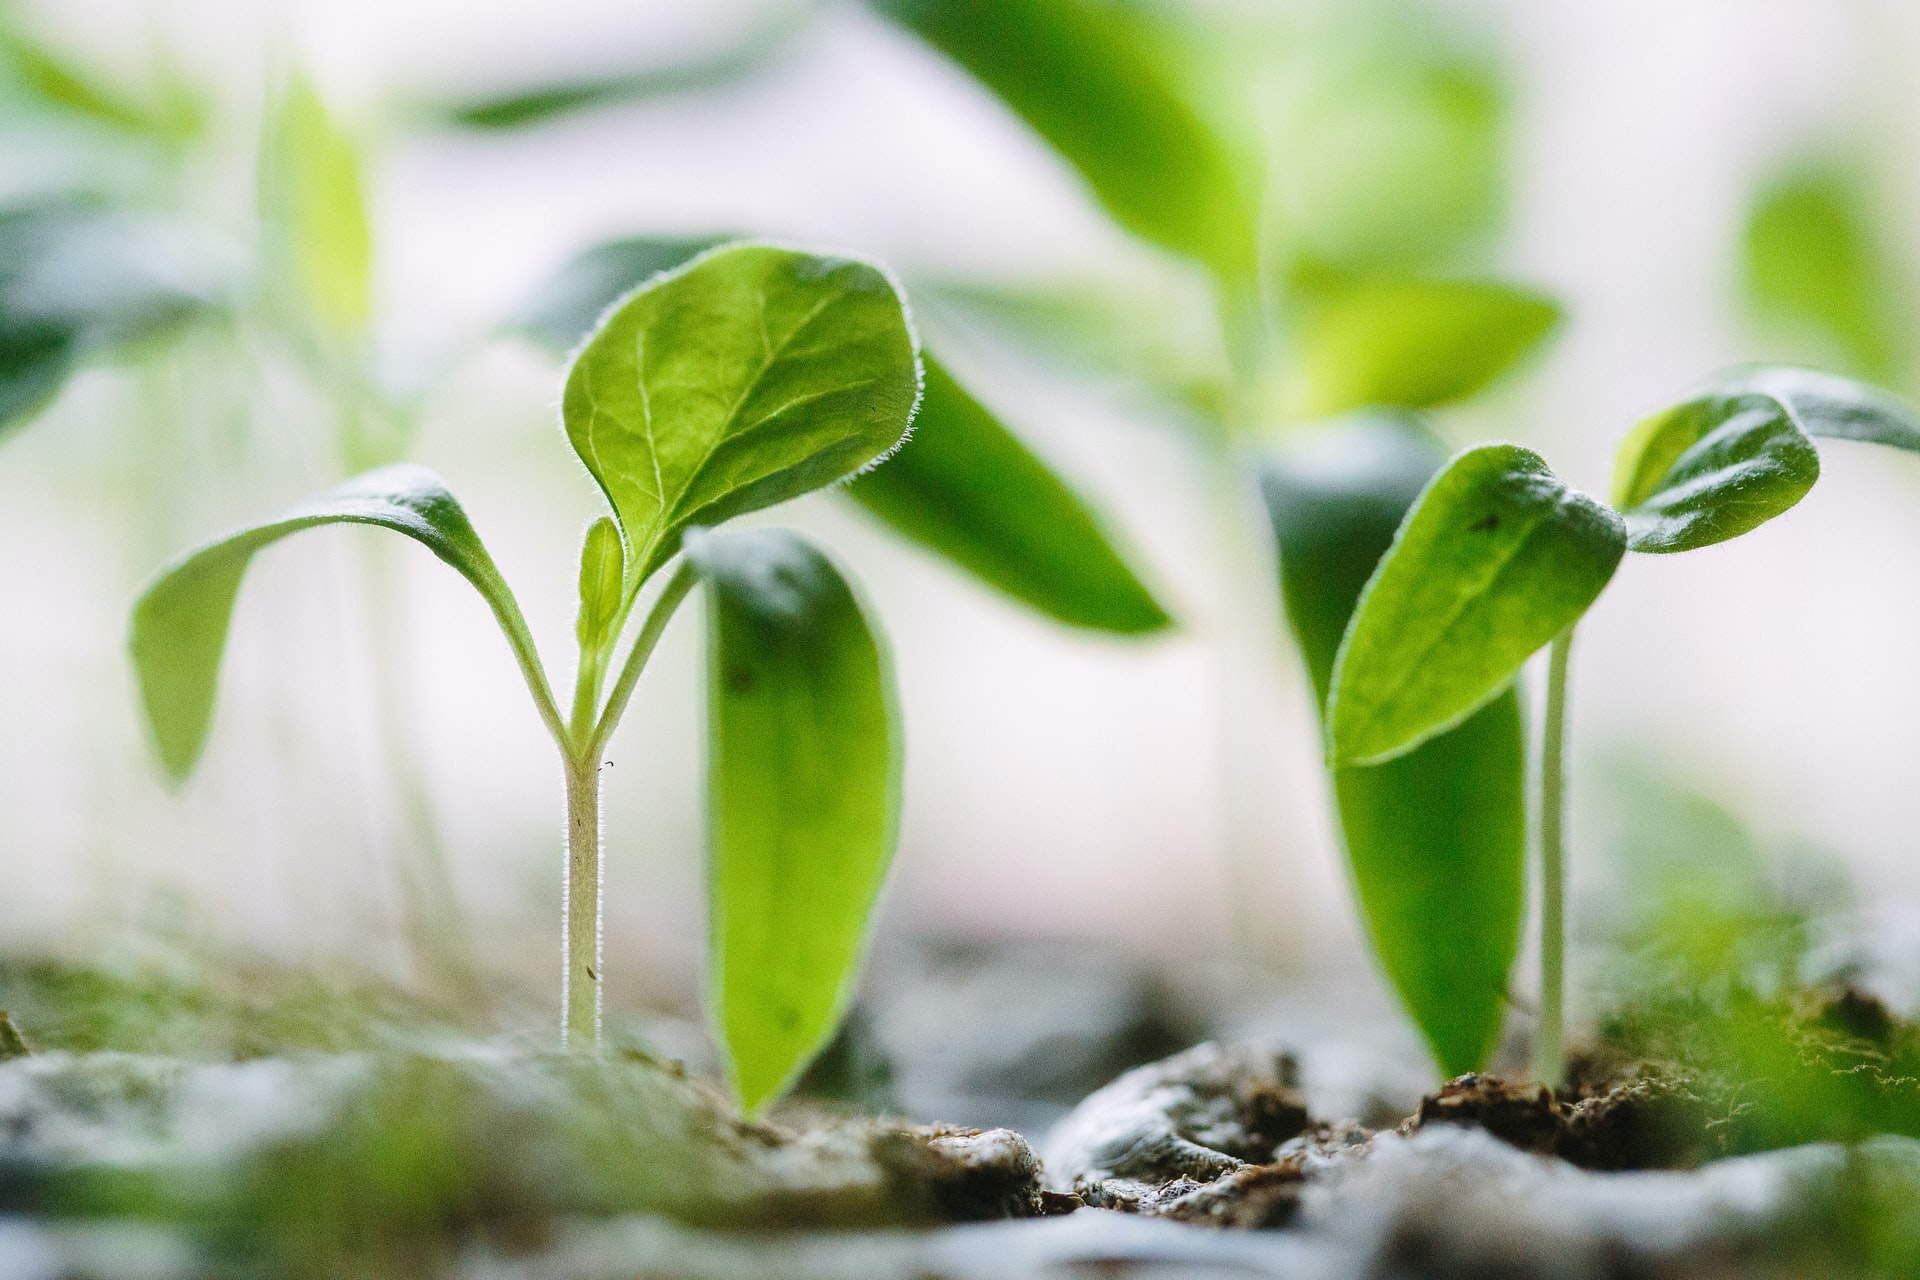 seedlings to represent growth and development